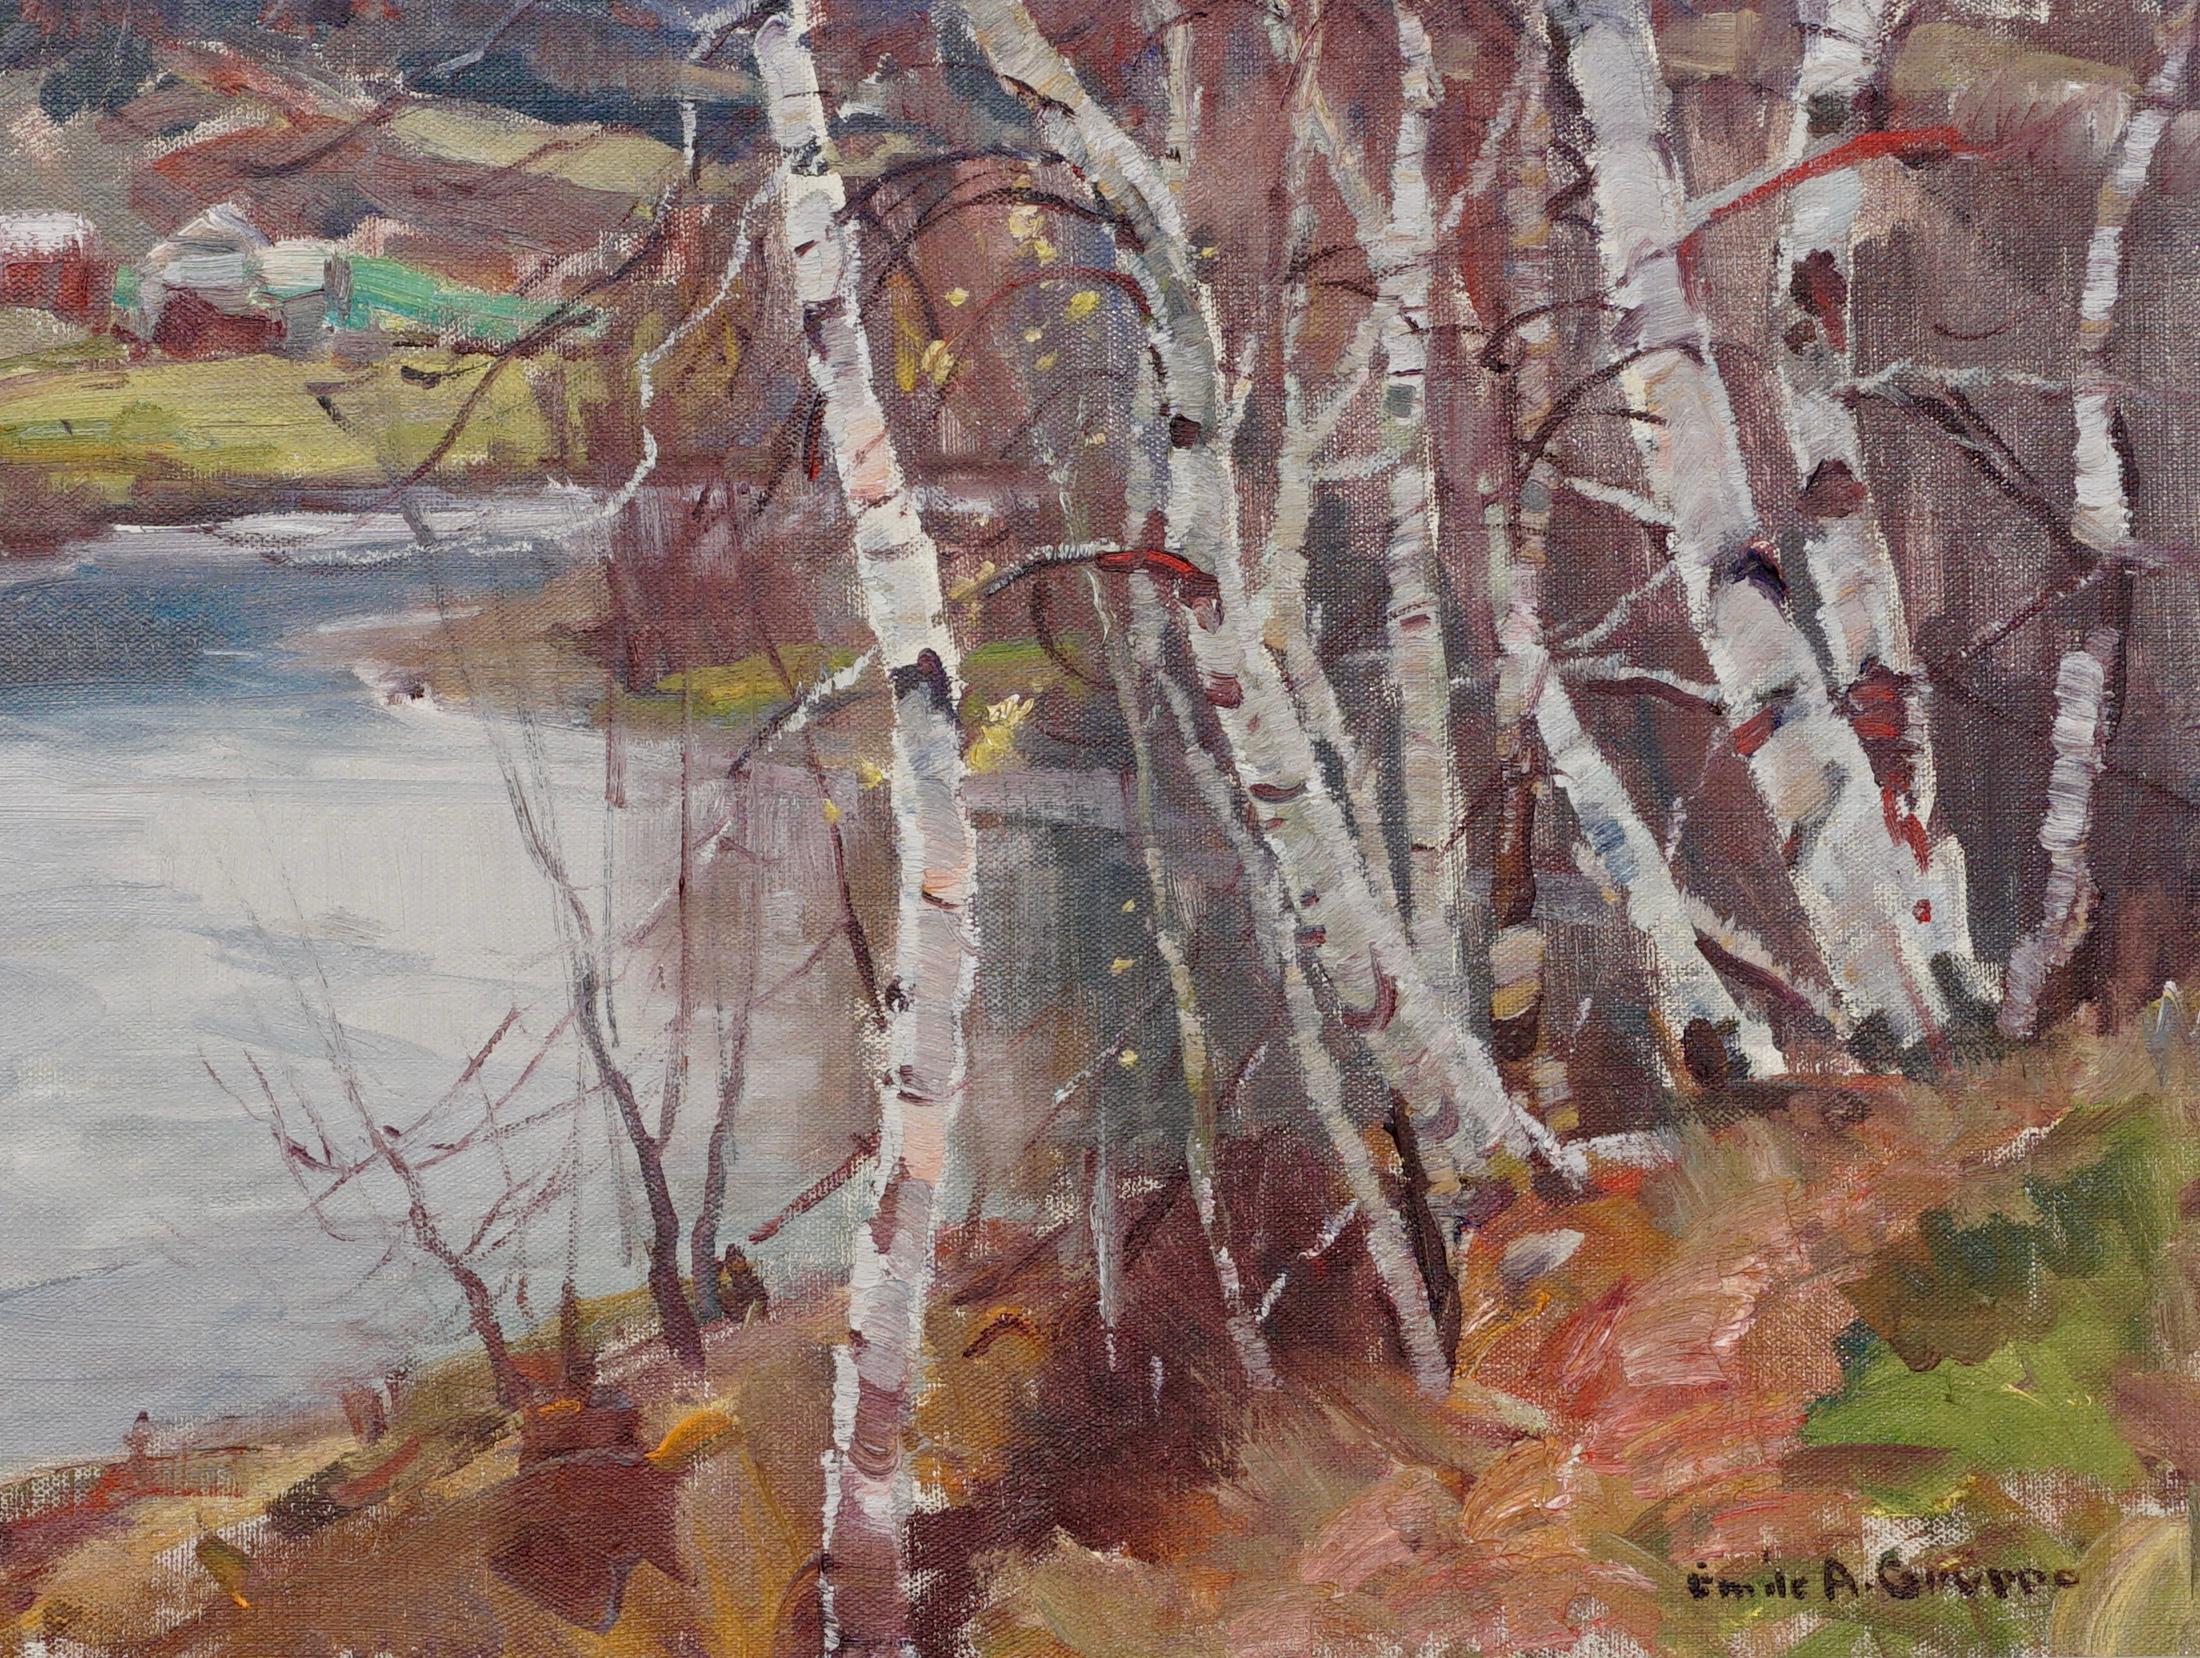 Emile Albert Gruppe (American, 1896-1978) “Birches”

Landscape with farm on river bank and birches. Probably Vermont in fall. A very strong impressionist style covering may aspects such as sky, mountains, landscape, farm, a riverbank and birch